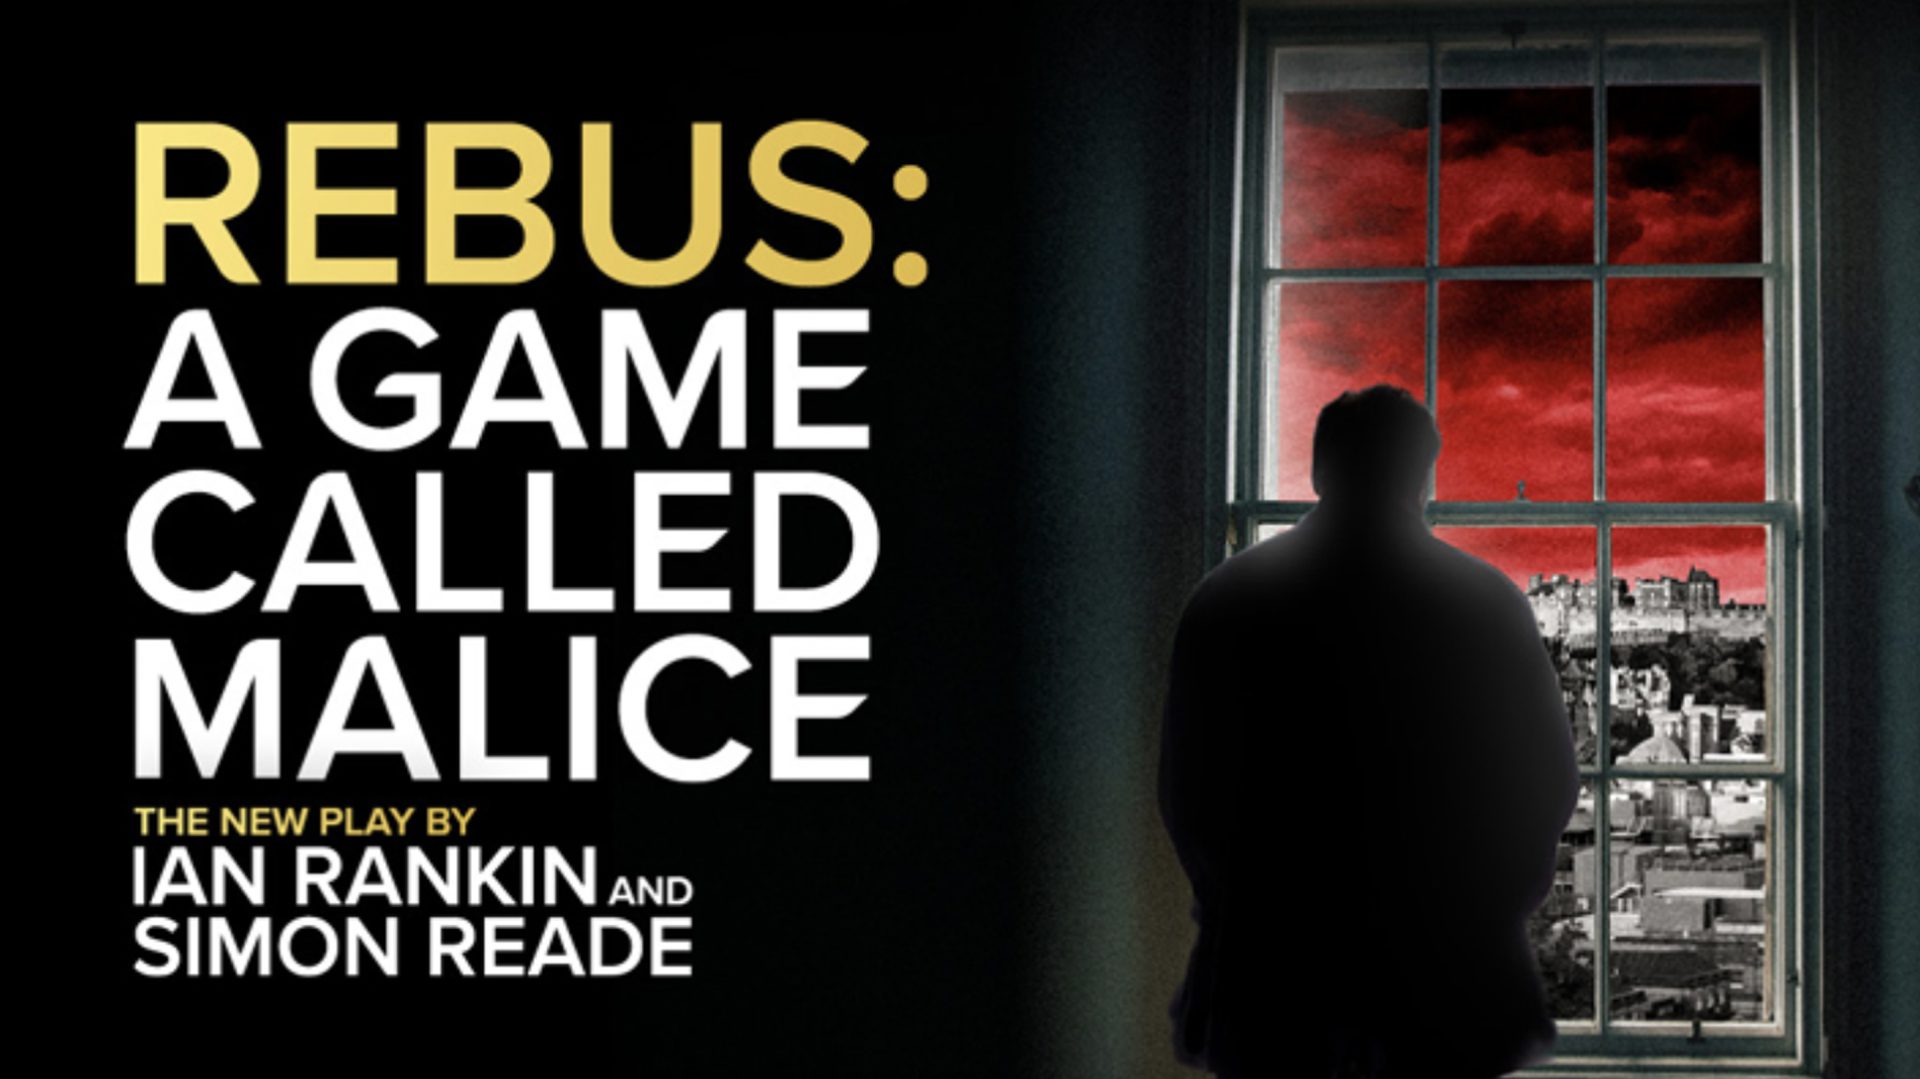 Ian Rankin’s Rebus: A Game Called Malice returns to the stage